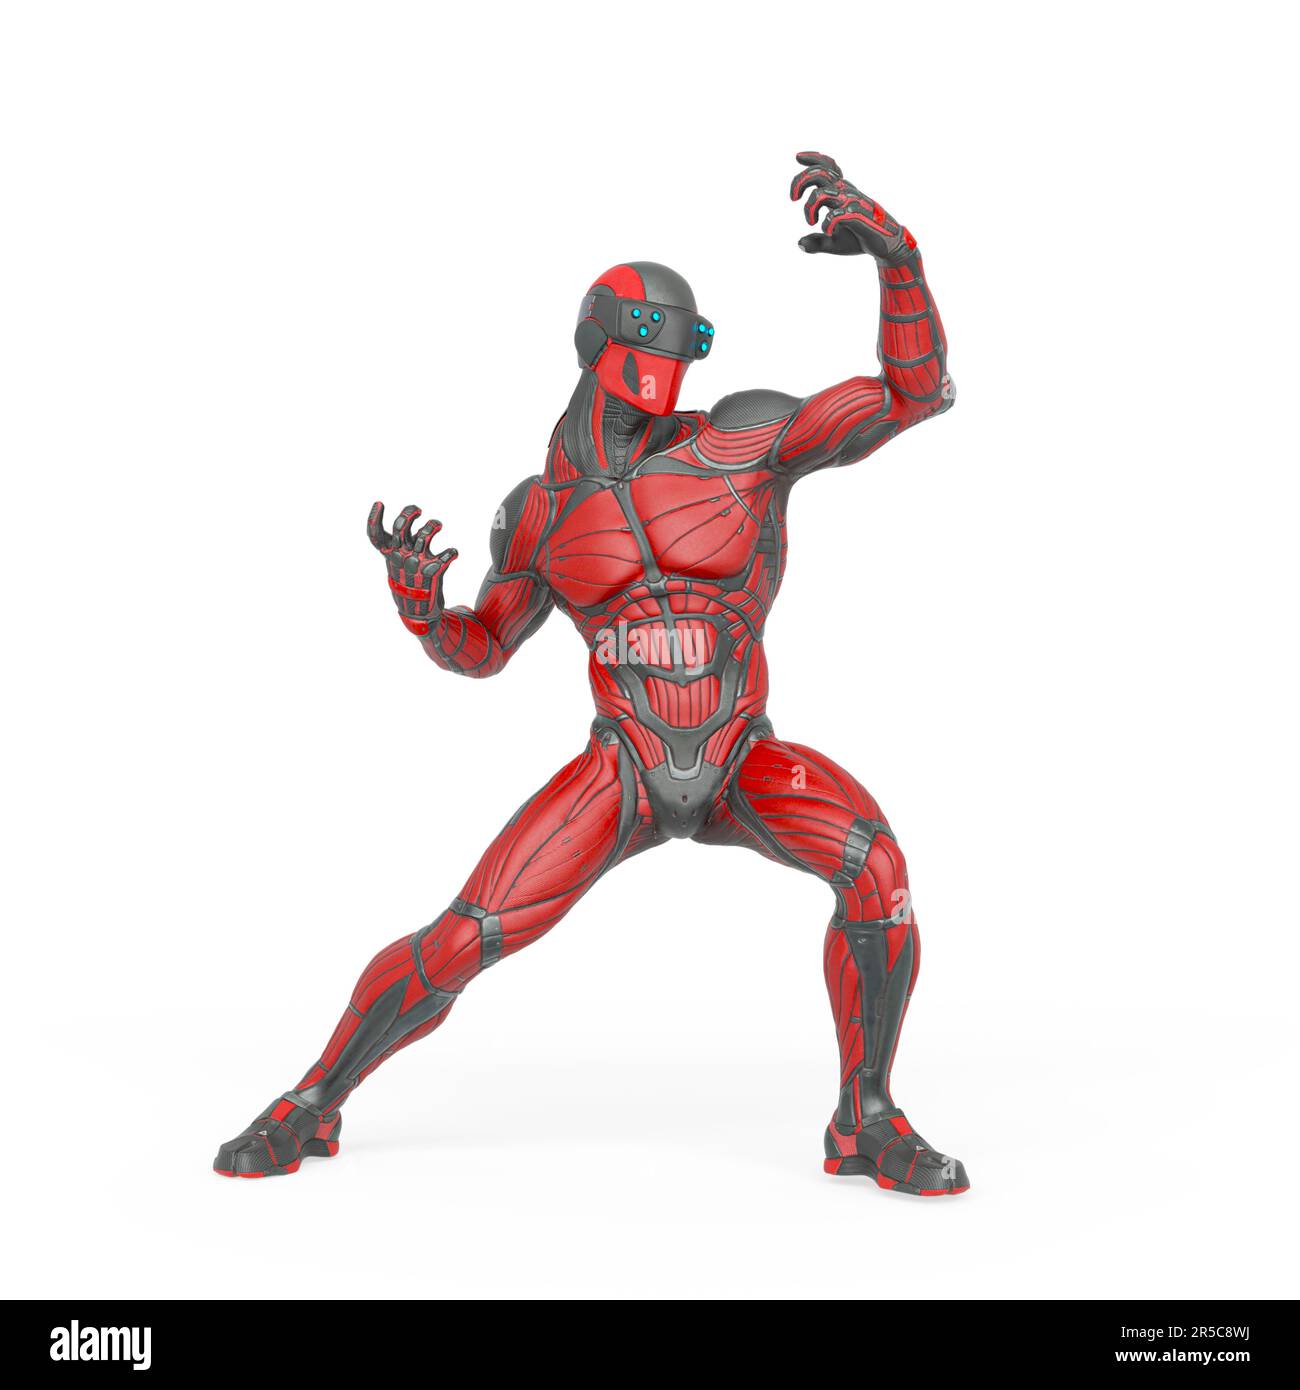 super hero in action on an exosuit, 3d illustration Stock Photo